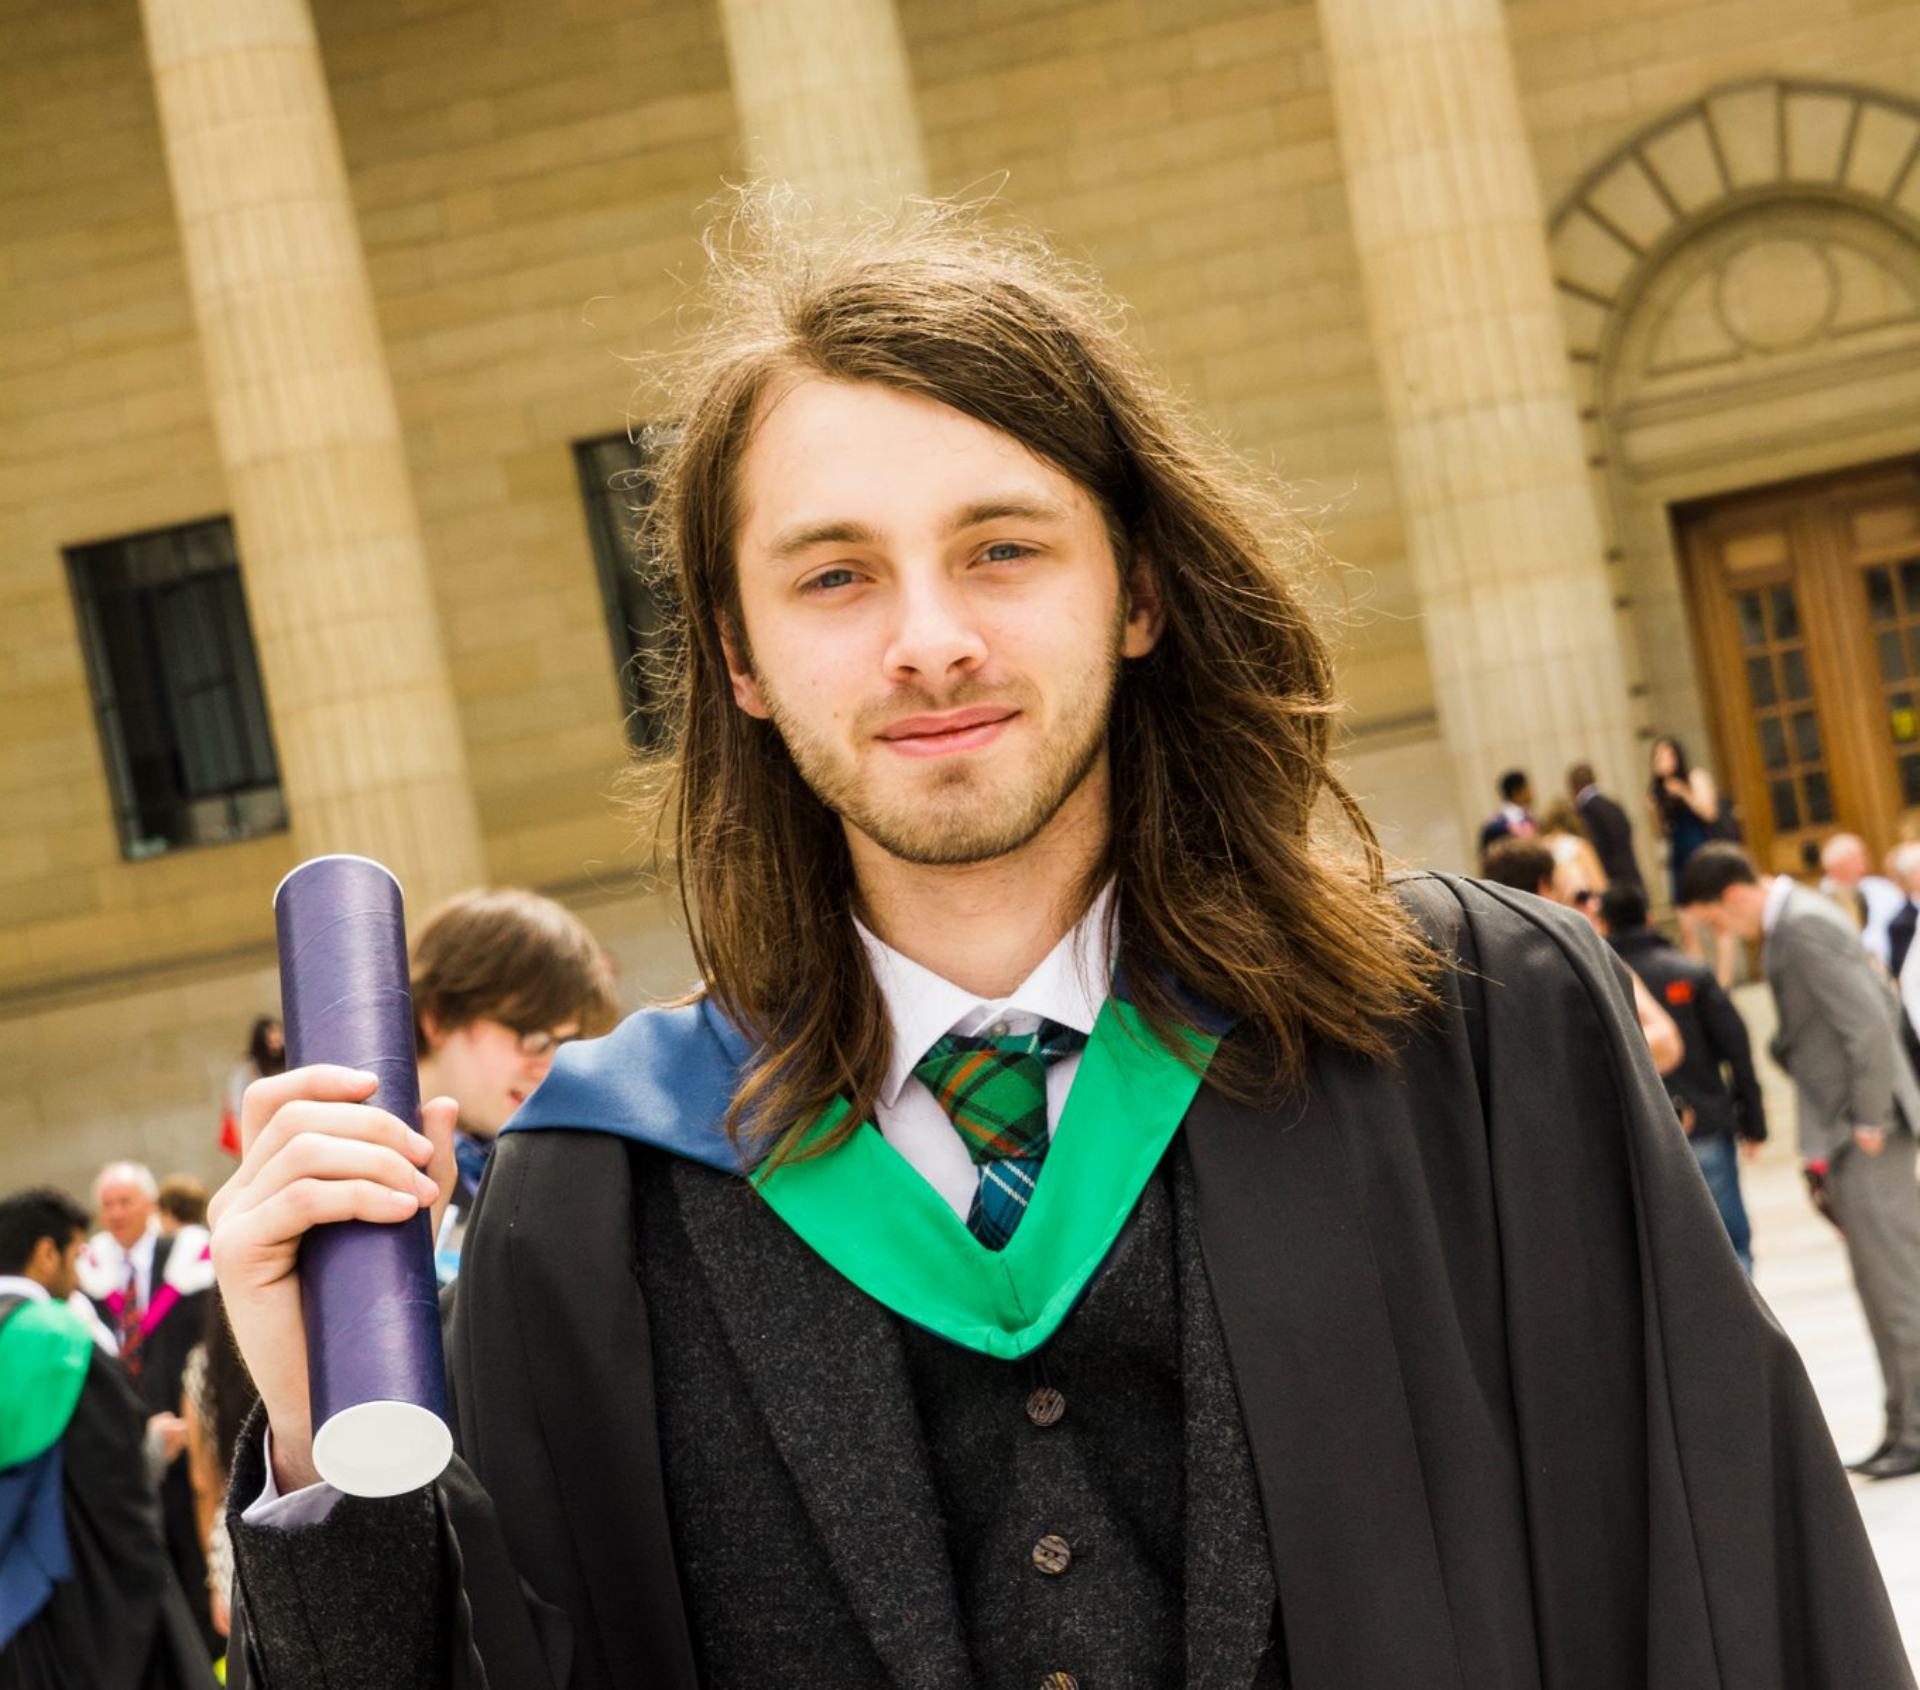 Male wearing graduation robes, holding scroll and smiling